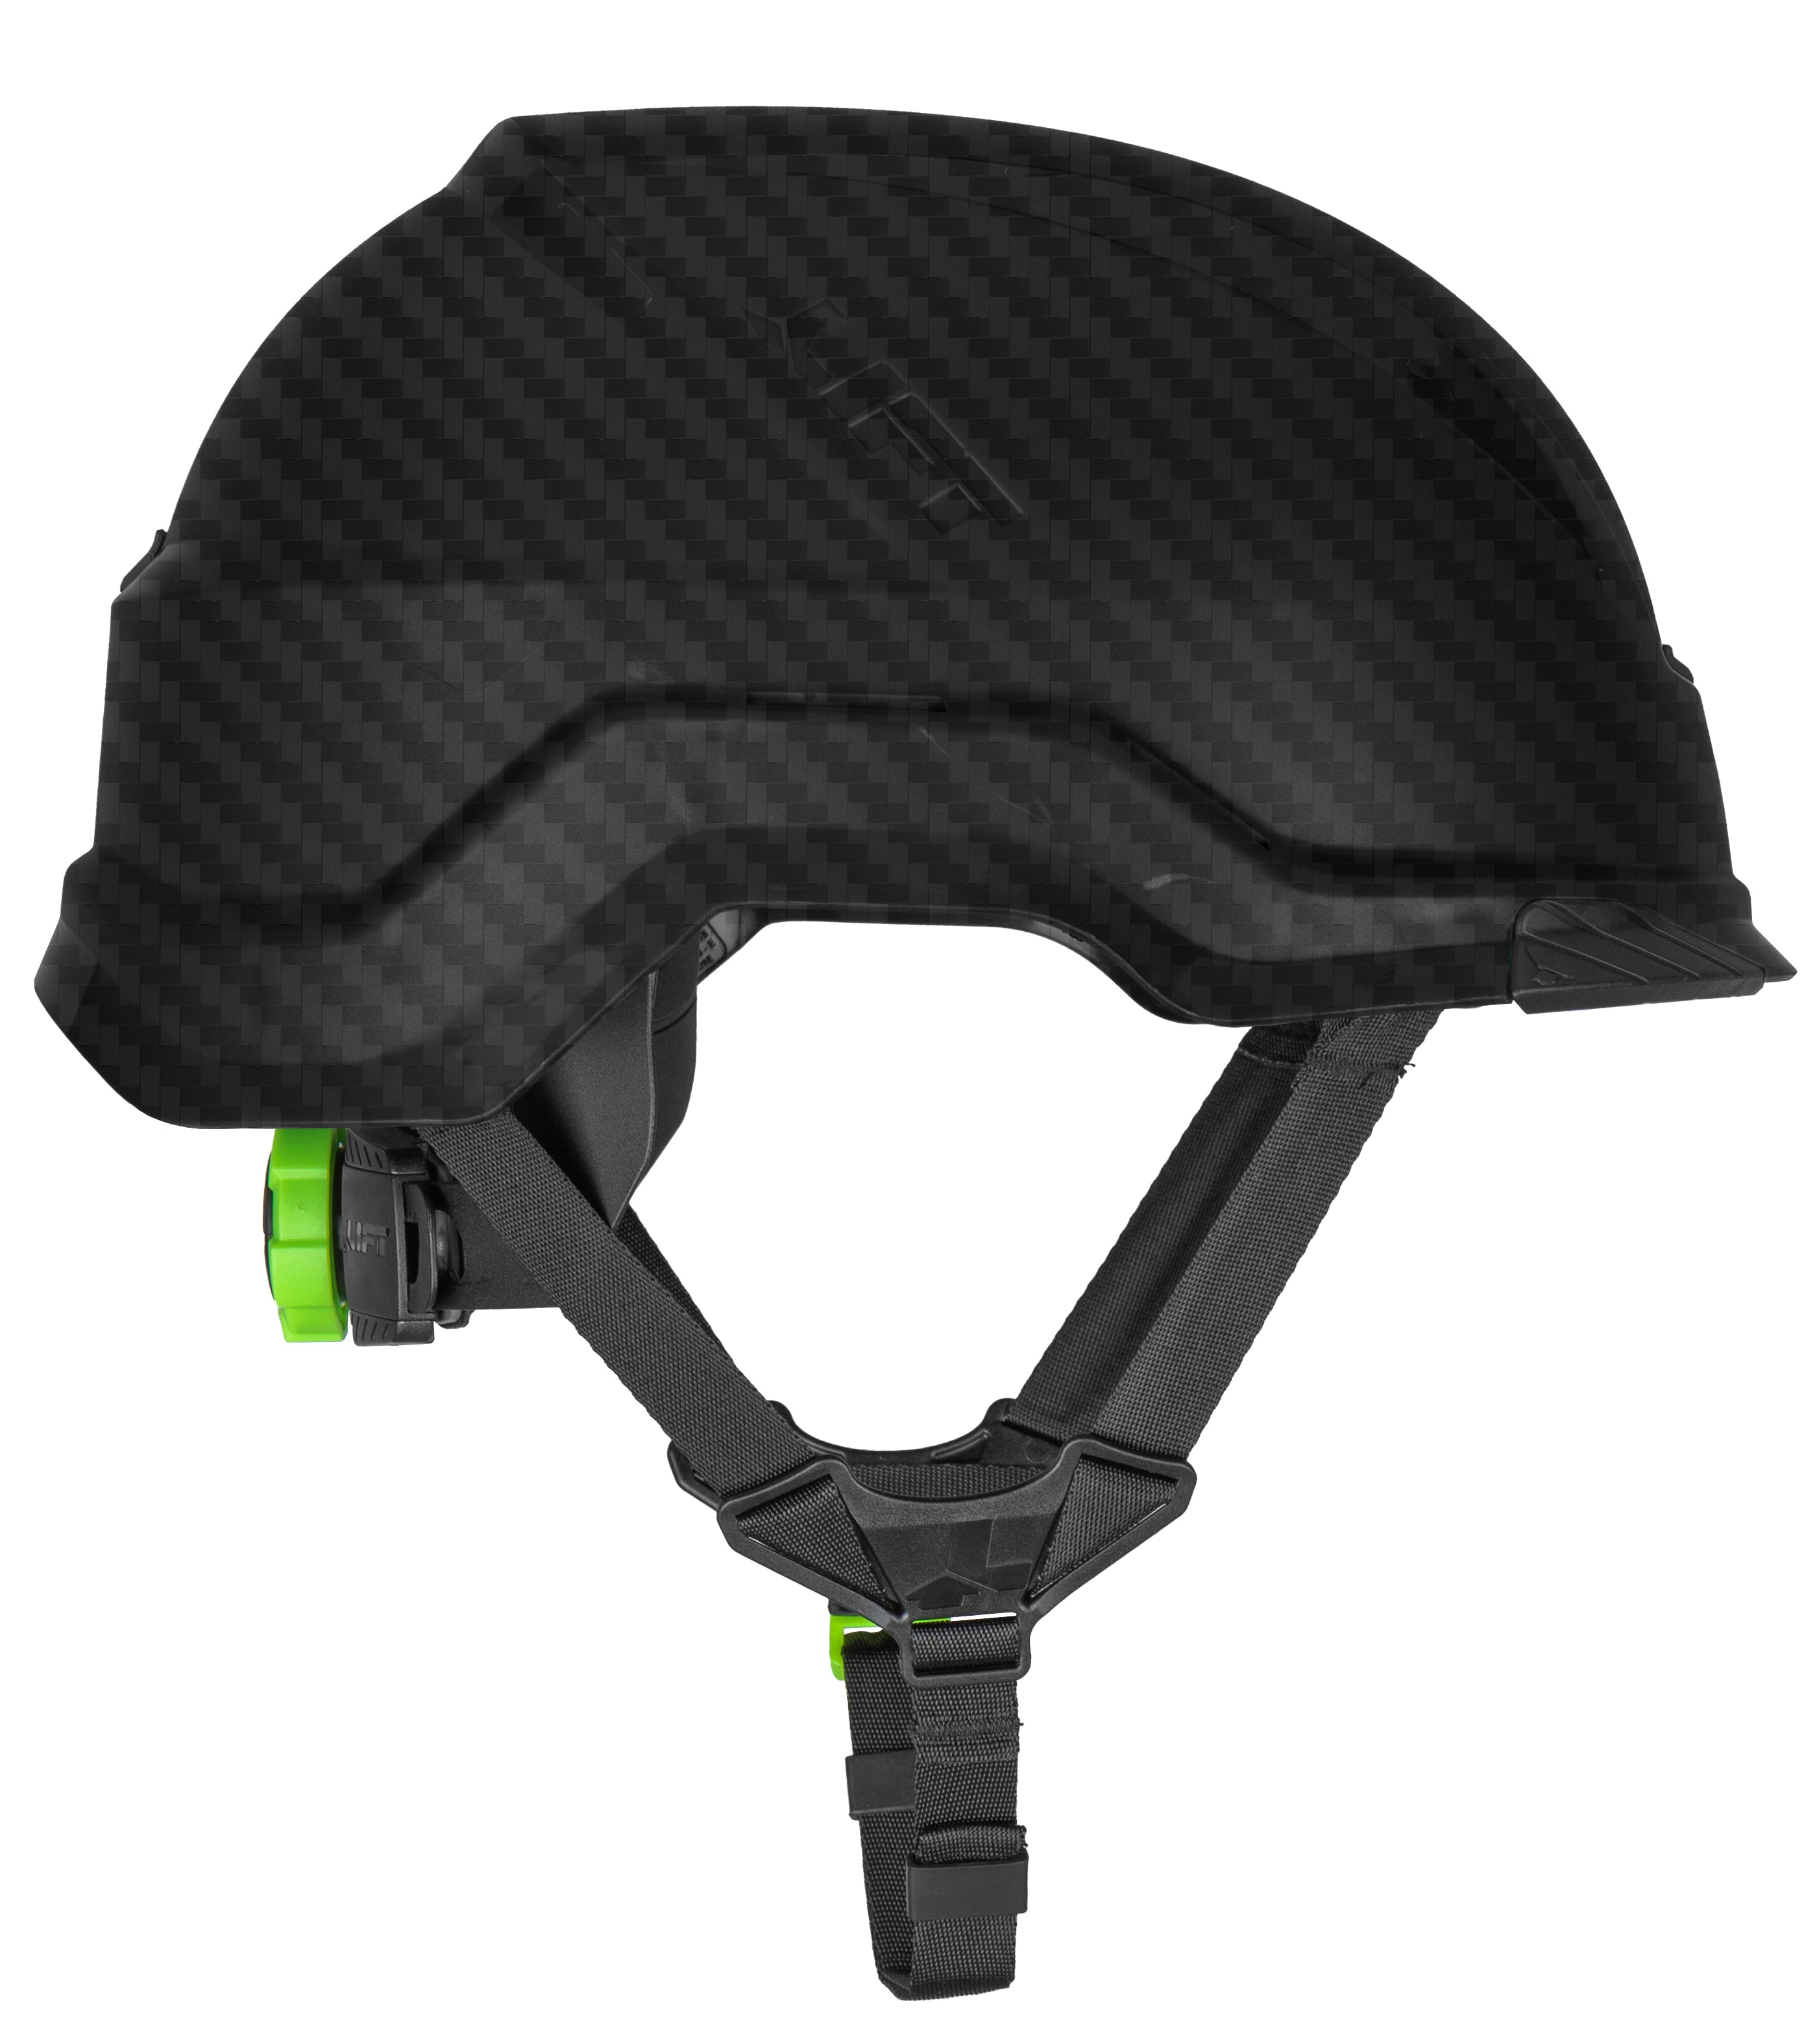 RADIX Safety Helmet - Non-Vented | LIFT Safety